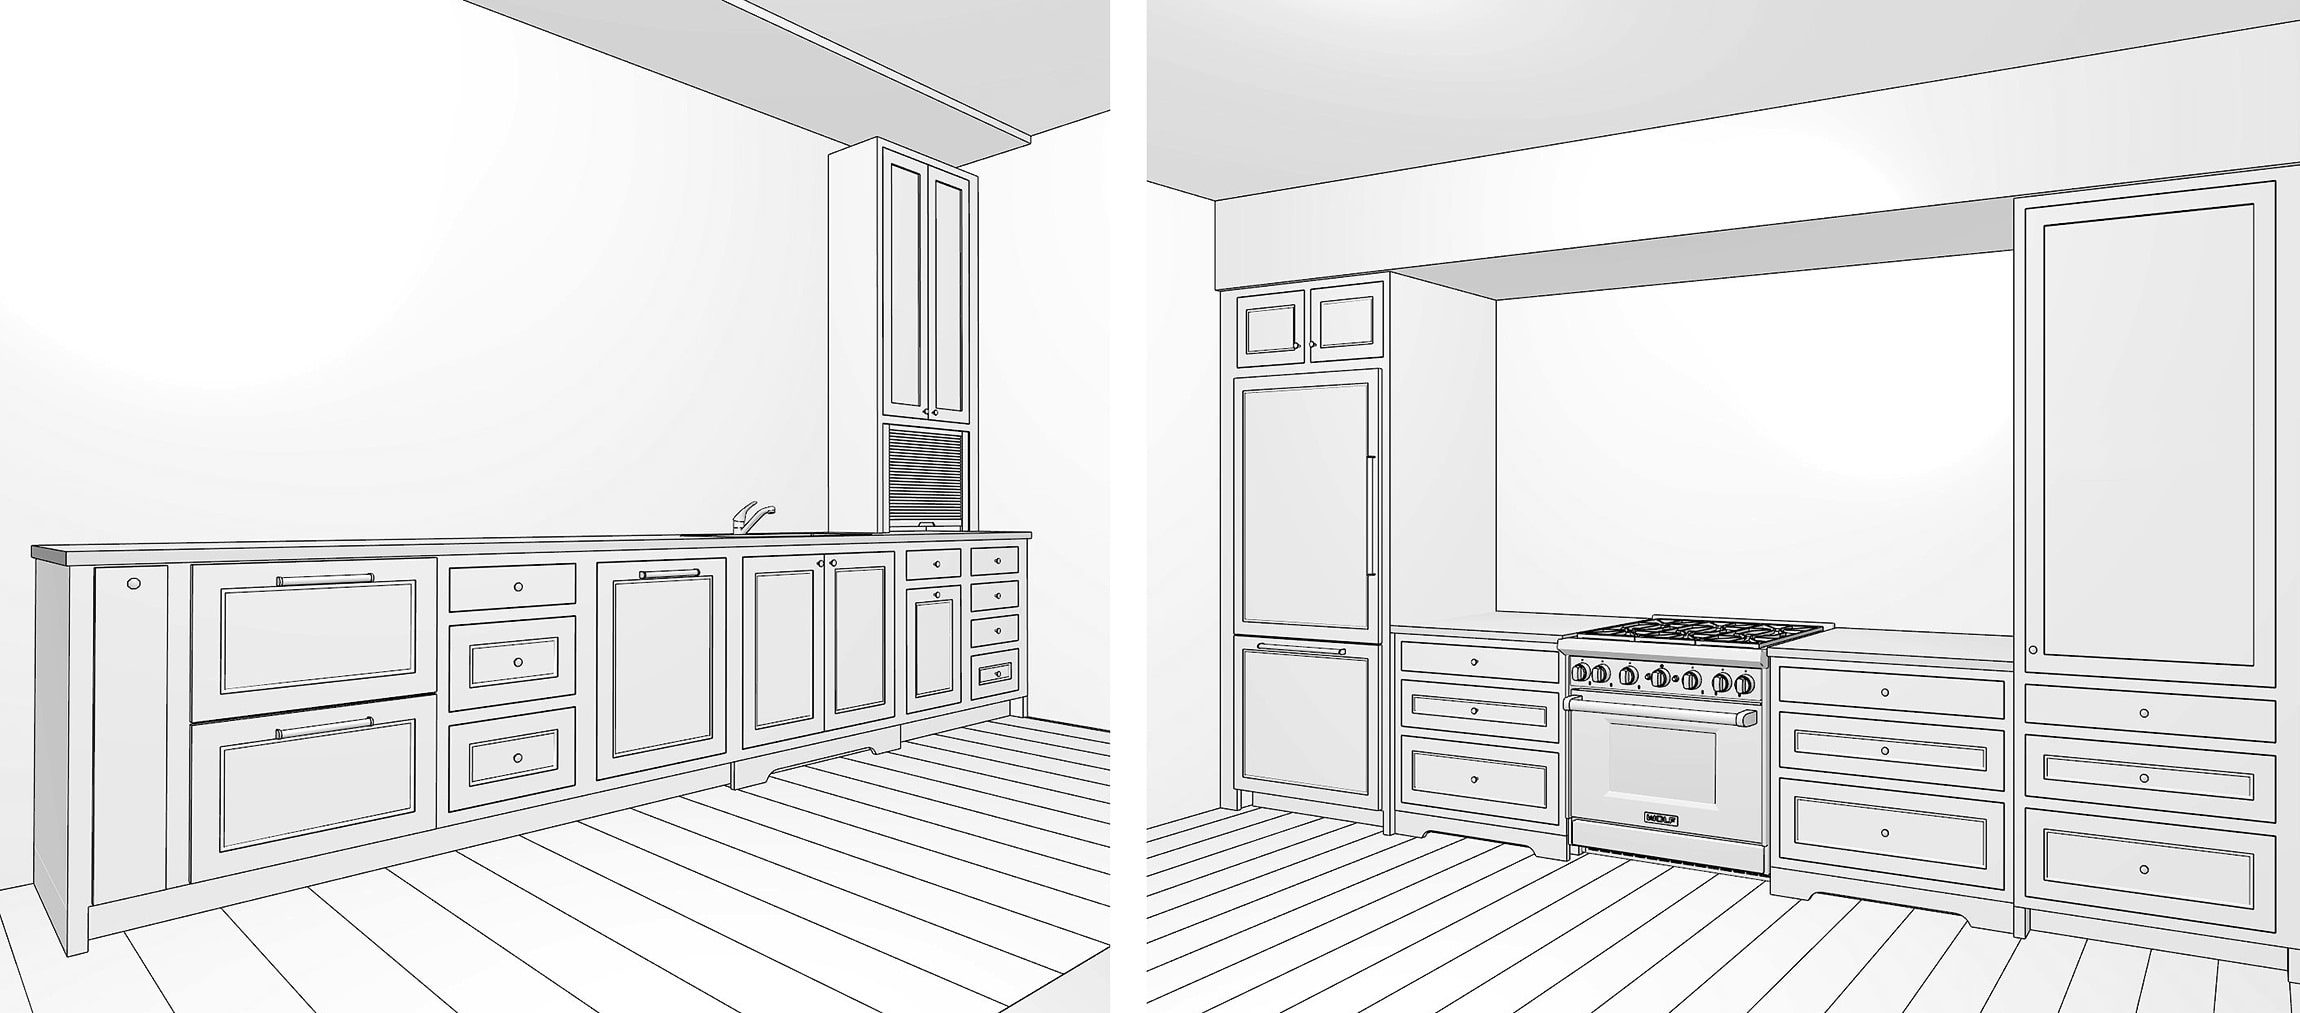 kitchen elevation drawing